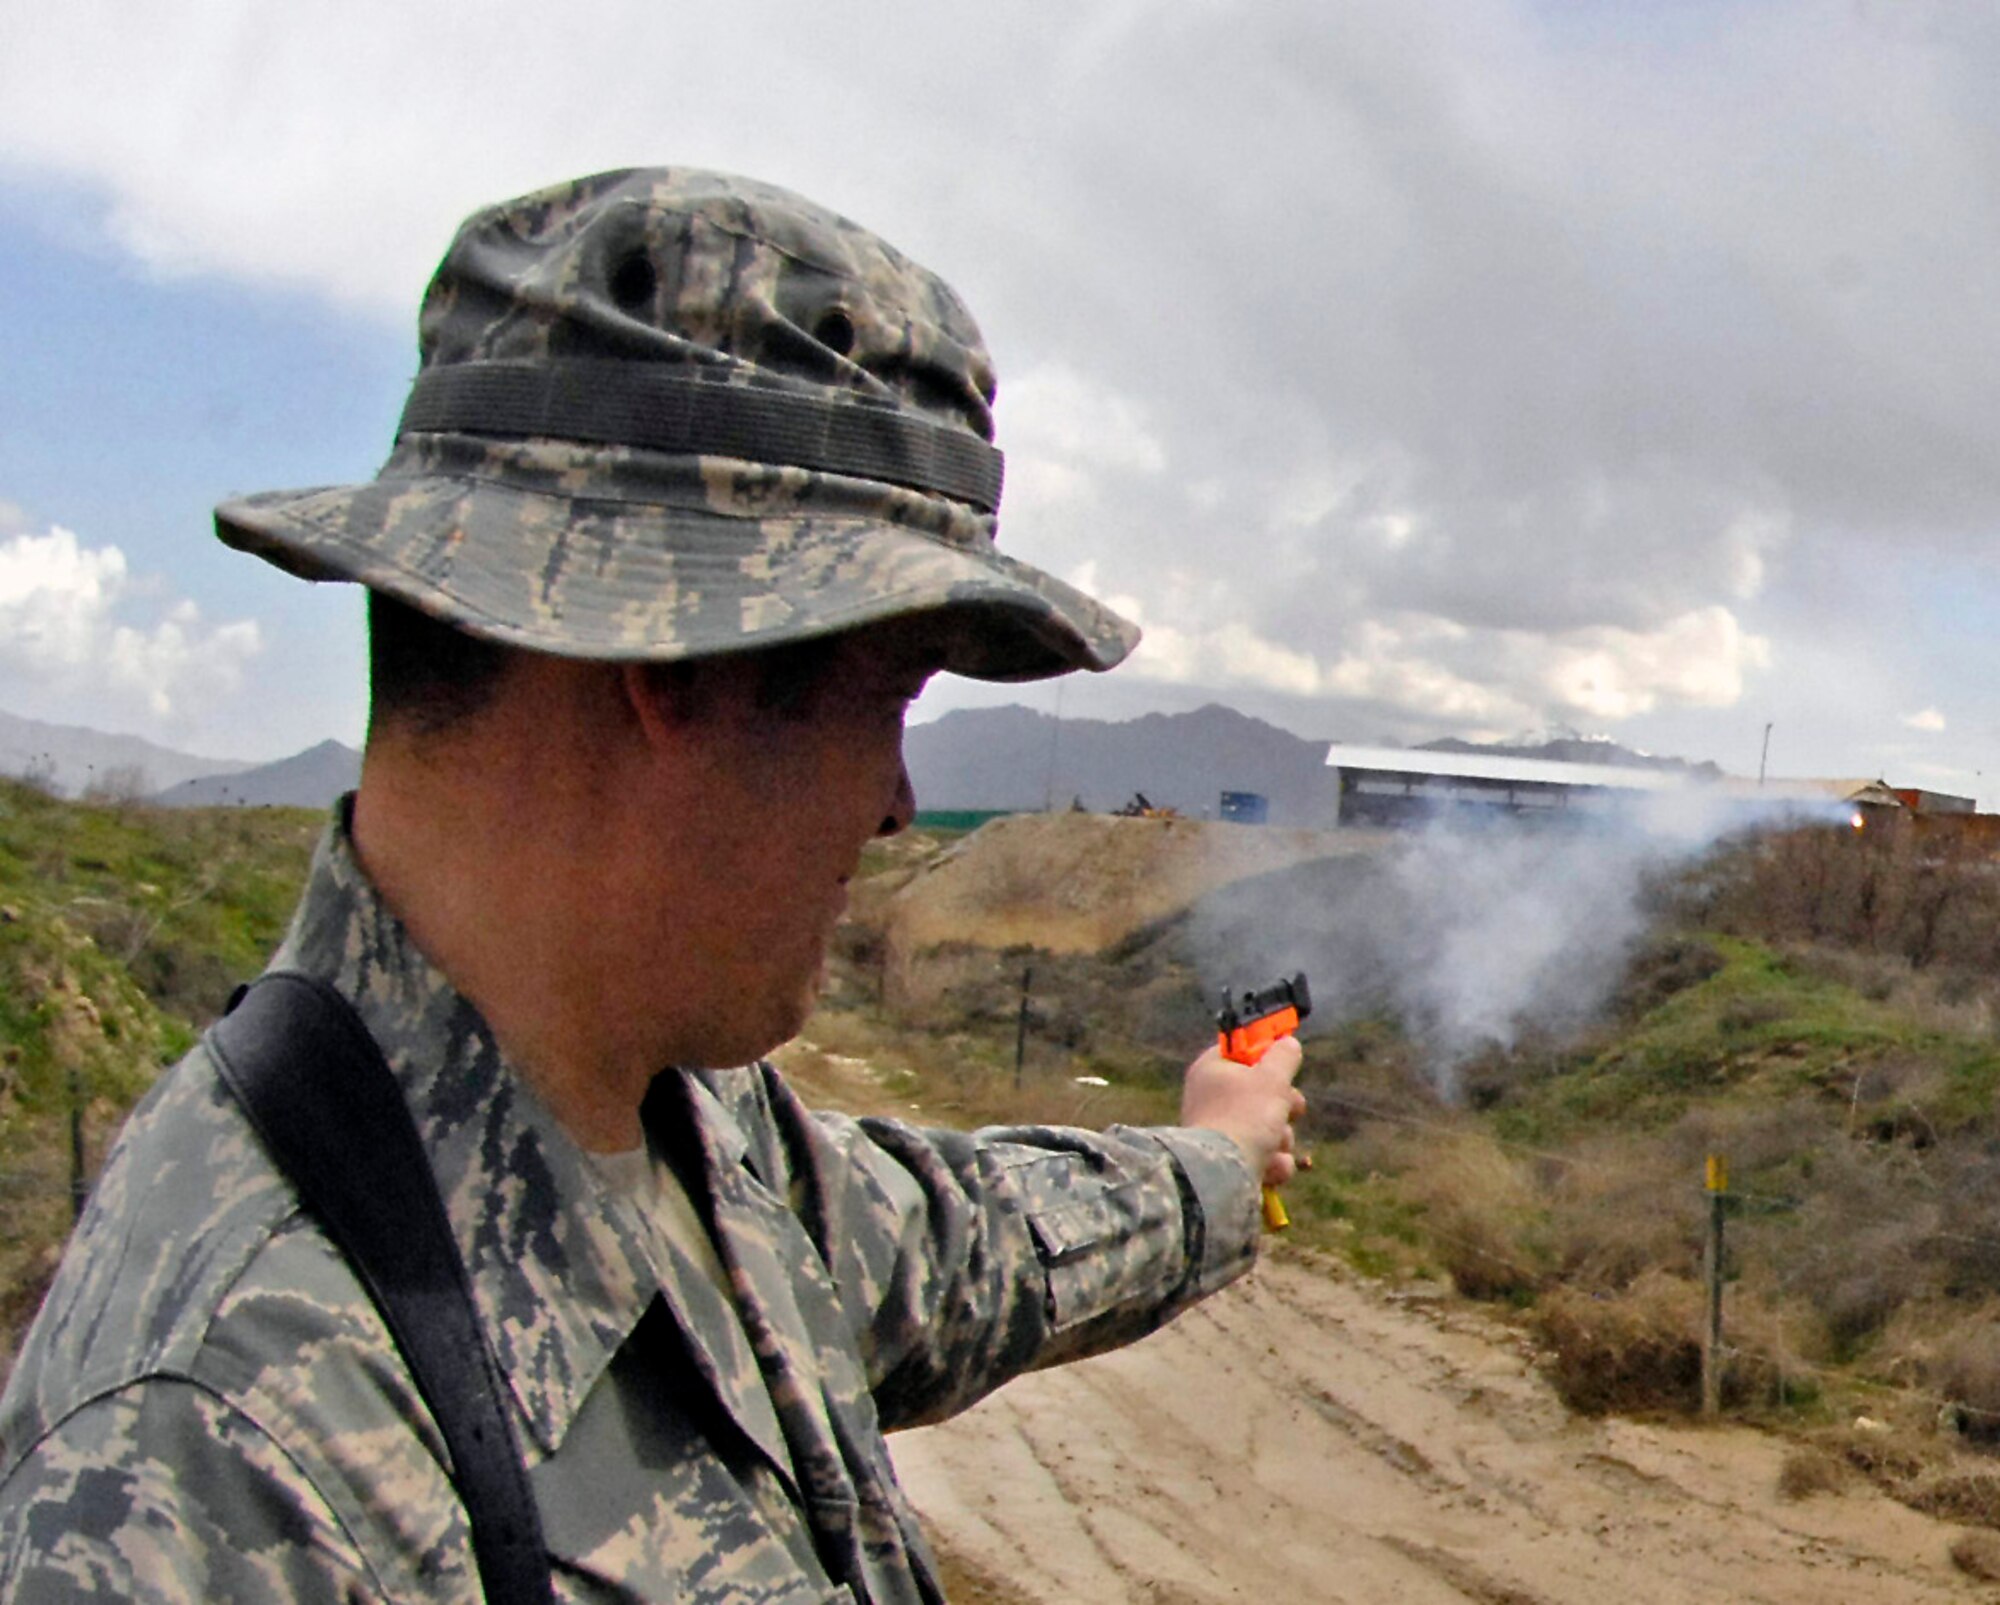 Tech. Sgt. Shane Sweeney fires off pyrotechnics that helps scare off birds near the flightline March 29 at Bagram Airfield, Afghanistan. The seven-member team of safety experts here patrol hot spots around the airfield's flightline to minimize the threat of bird strikes on the various aircraft taking off and landing. Sergeant Sweeney is a 455th Air Expeditionary Wing weapons safety member. (U.S. Air Force photo/Staff Sgt. Jason Lake) 